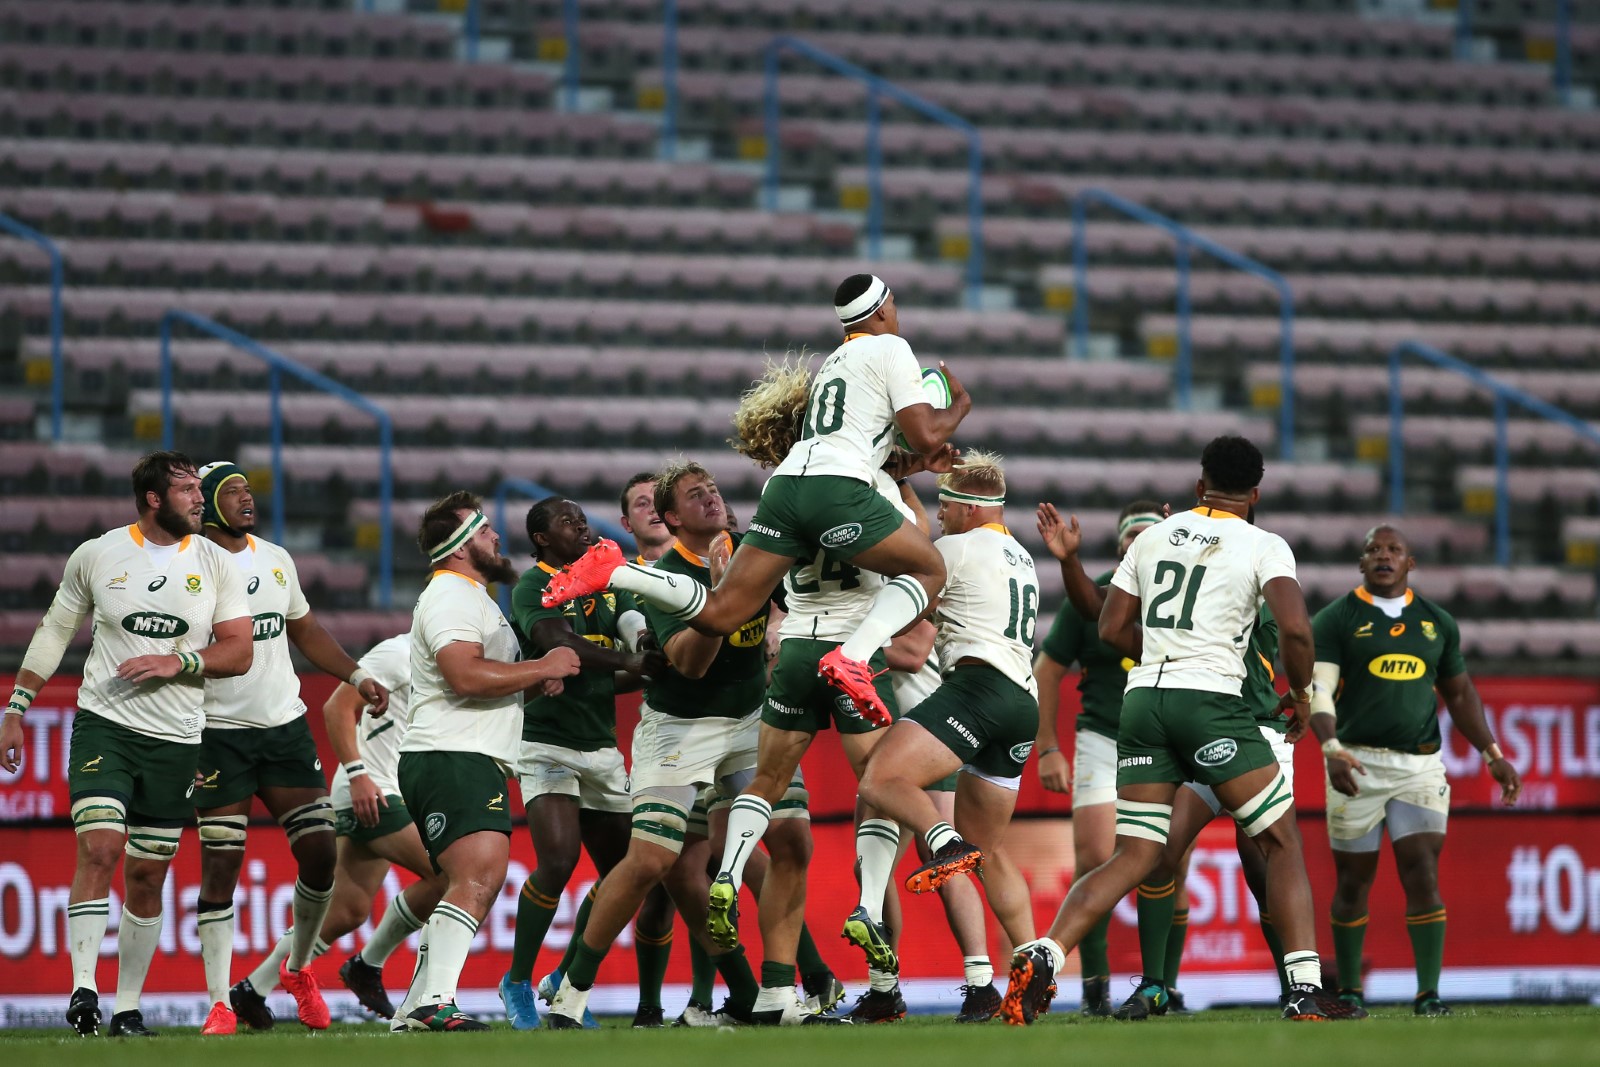 Damian Willemse soars to take a high ball.